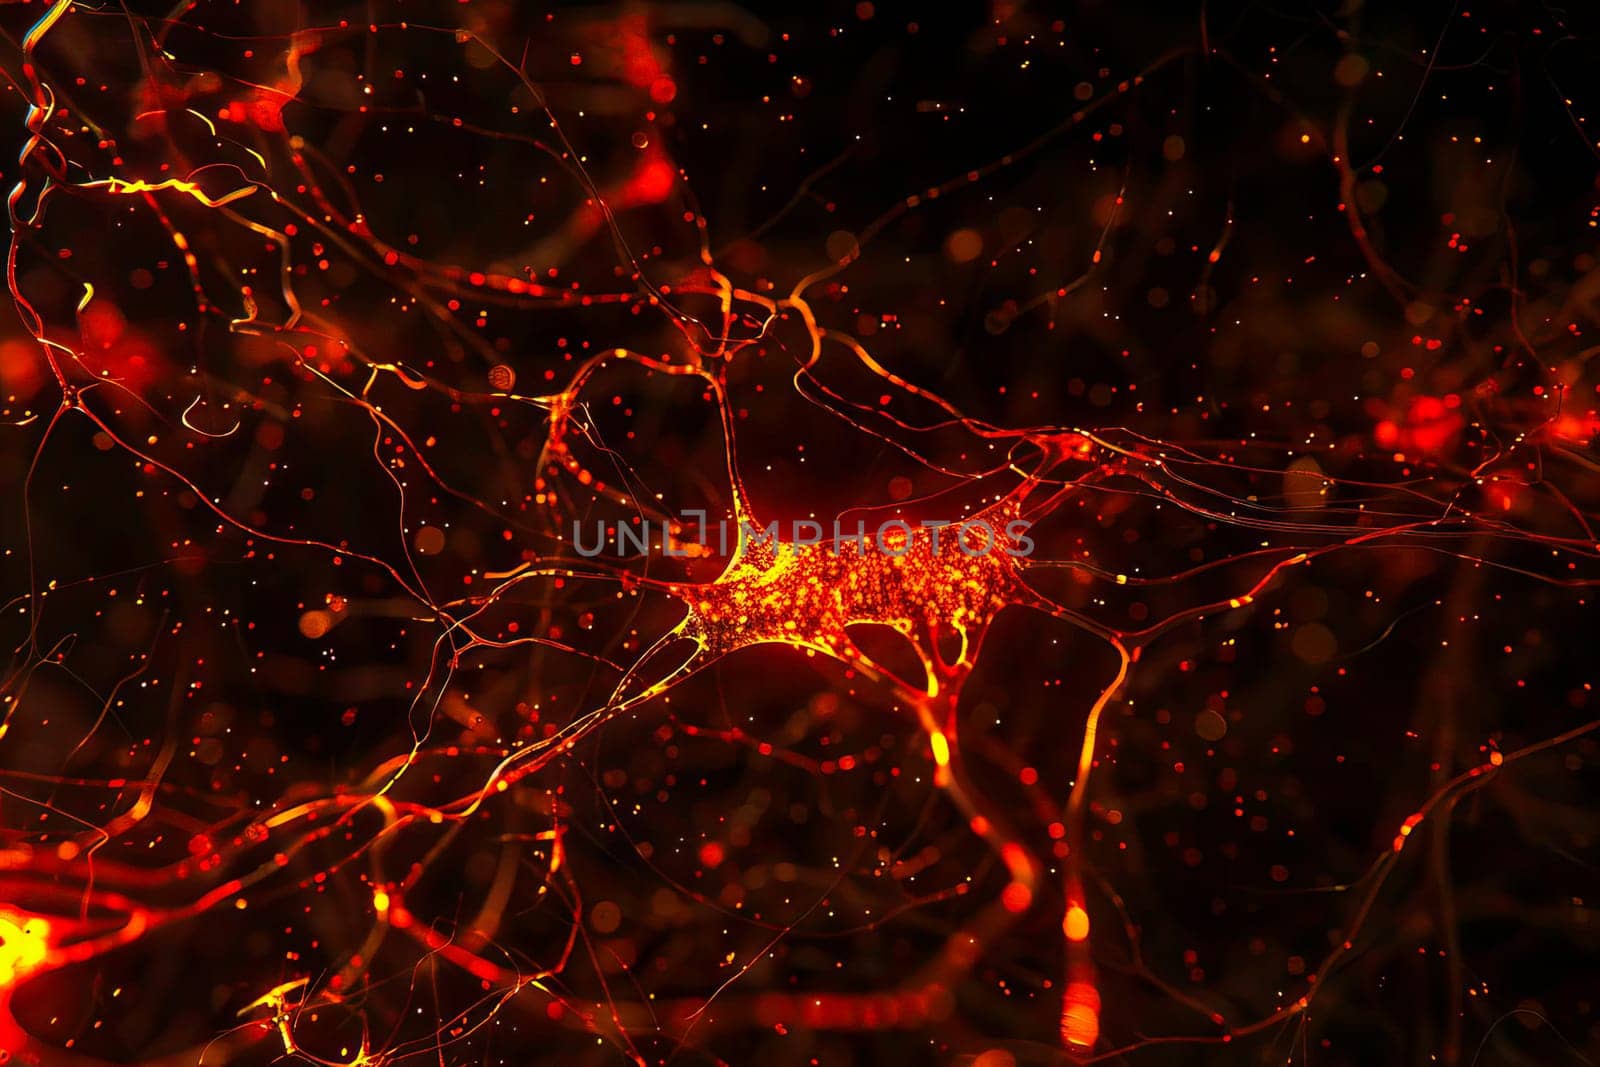 A network of neurons transmitting electrical signals by vladimka